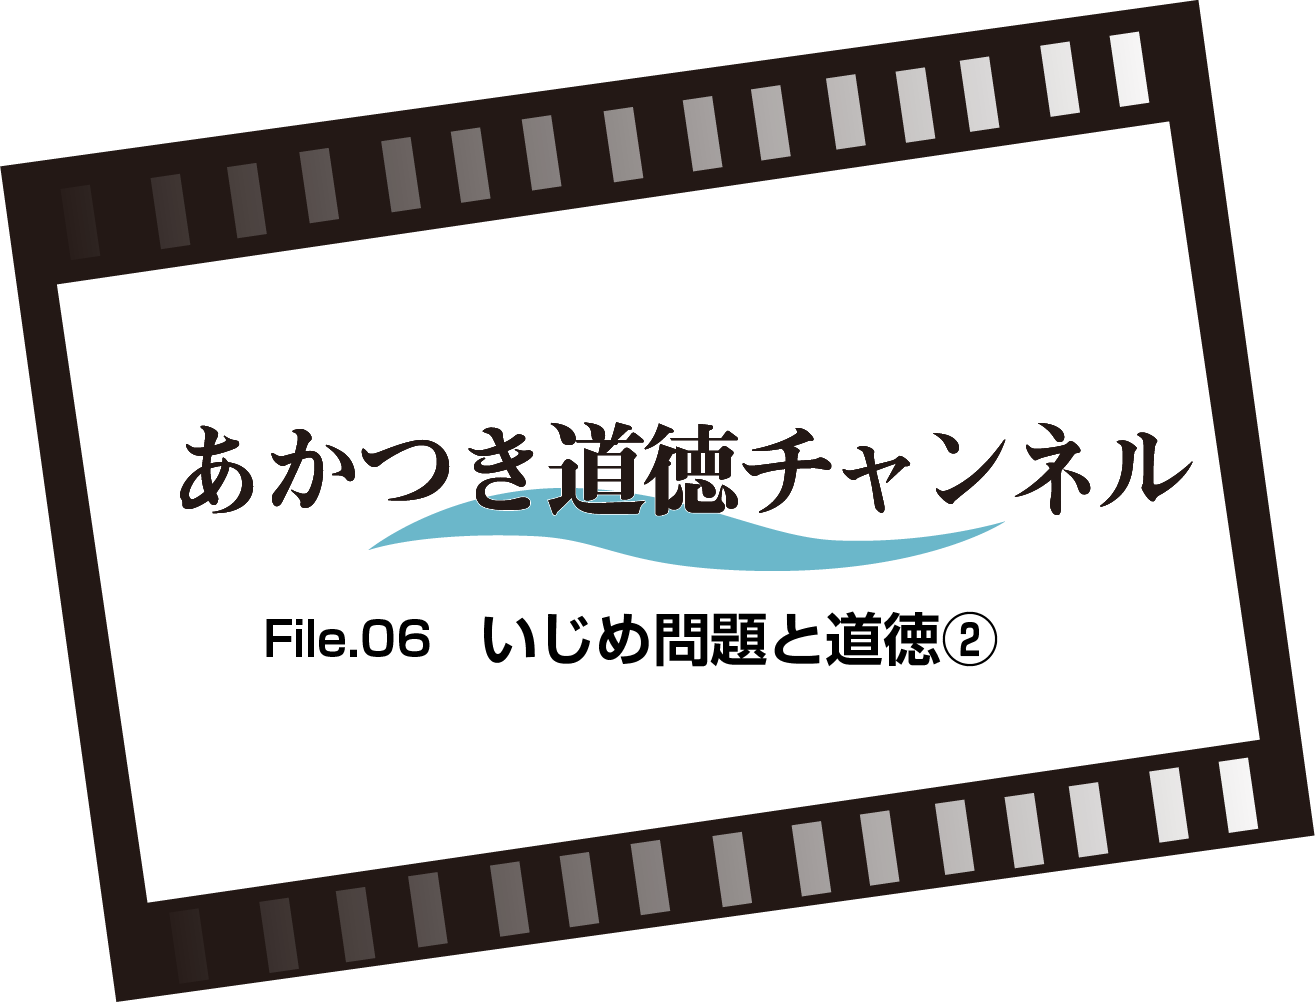 File.06　いじめ問題と道徳②（2:40）